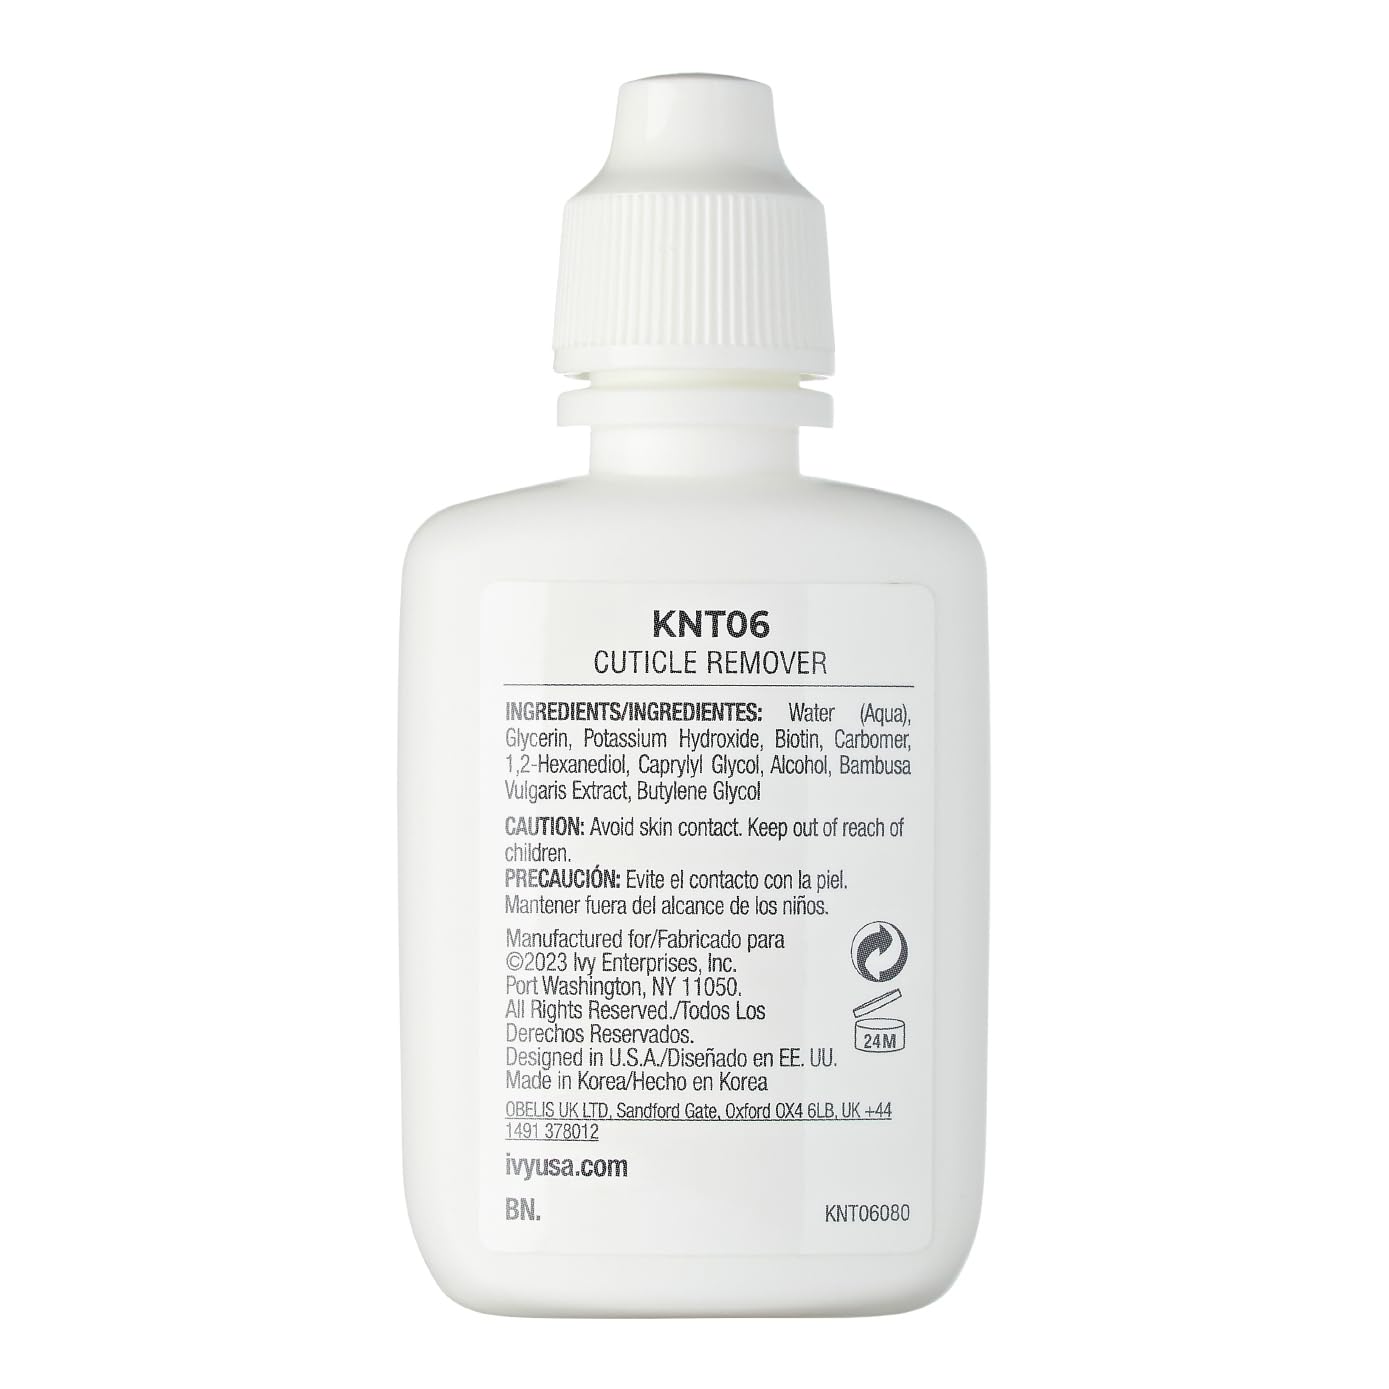 Kiss New York Cuticle Remover KNT06